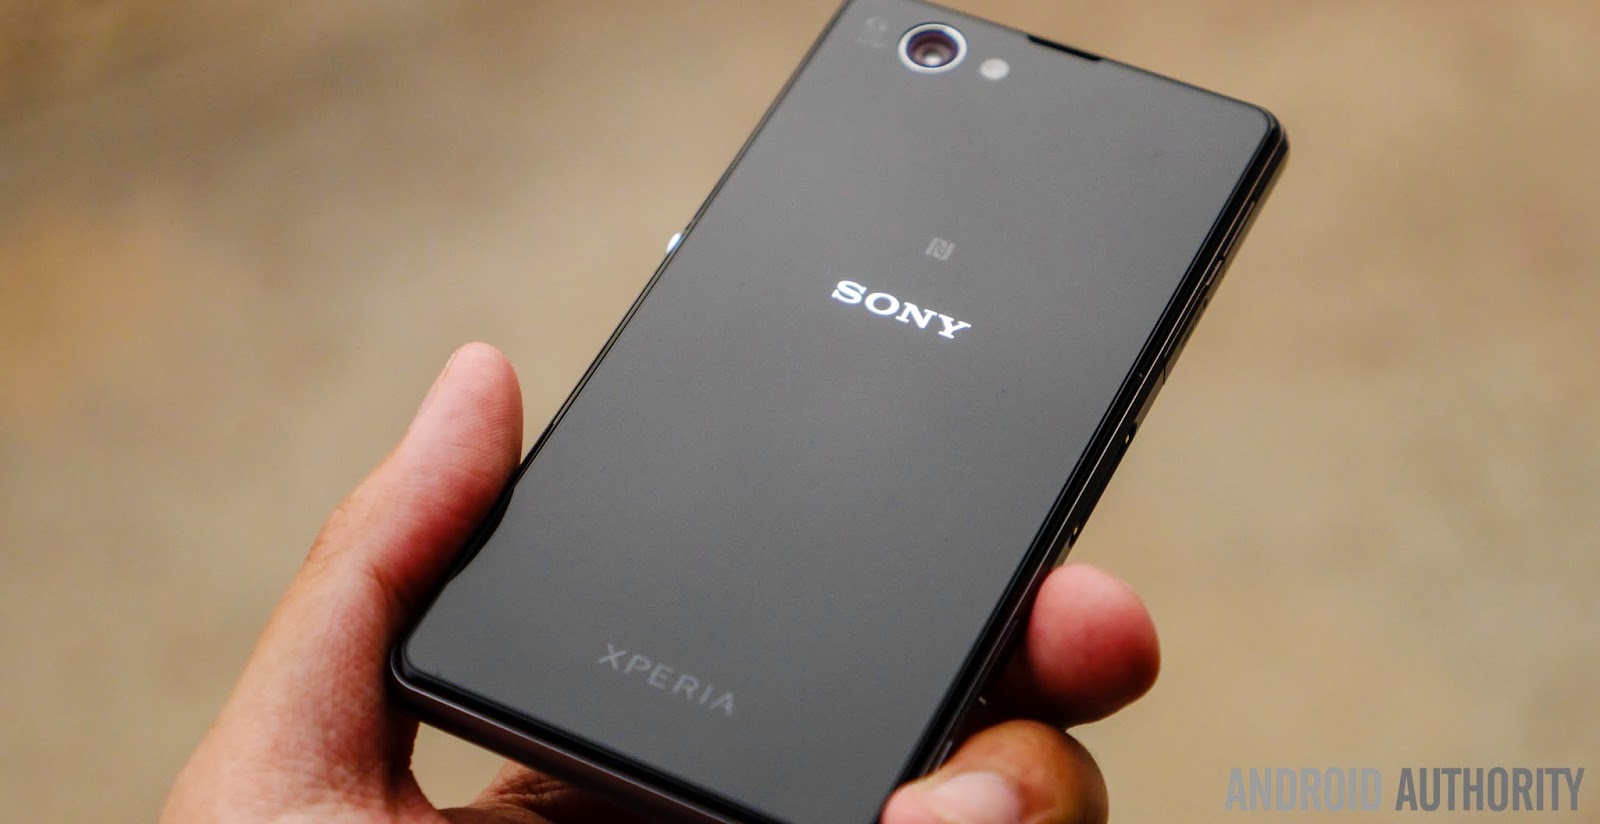 Sony Xperia Z3 + Z3 Compact review | Android Central